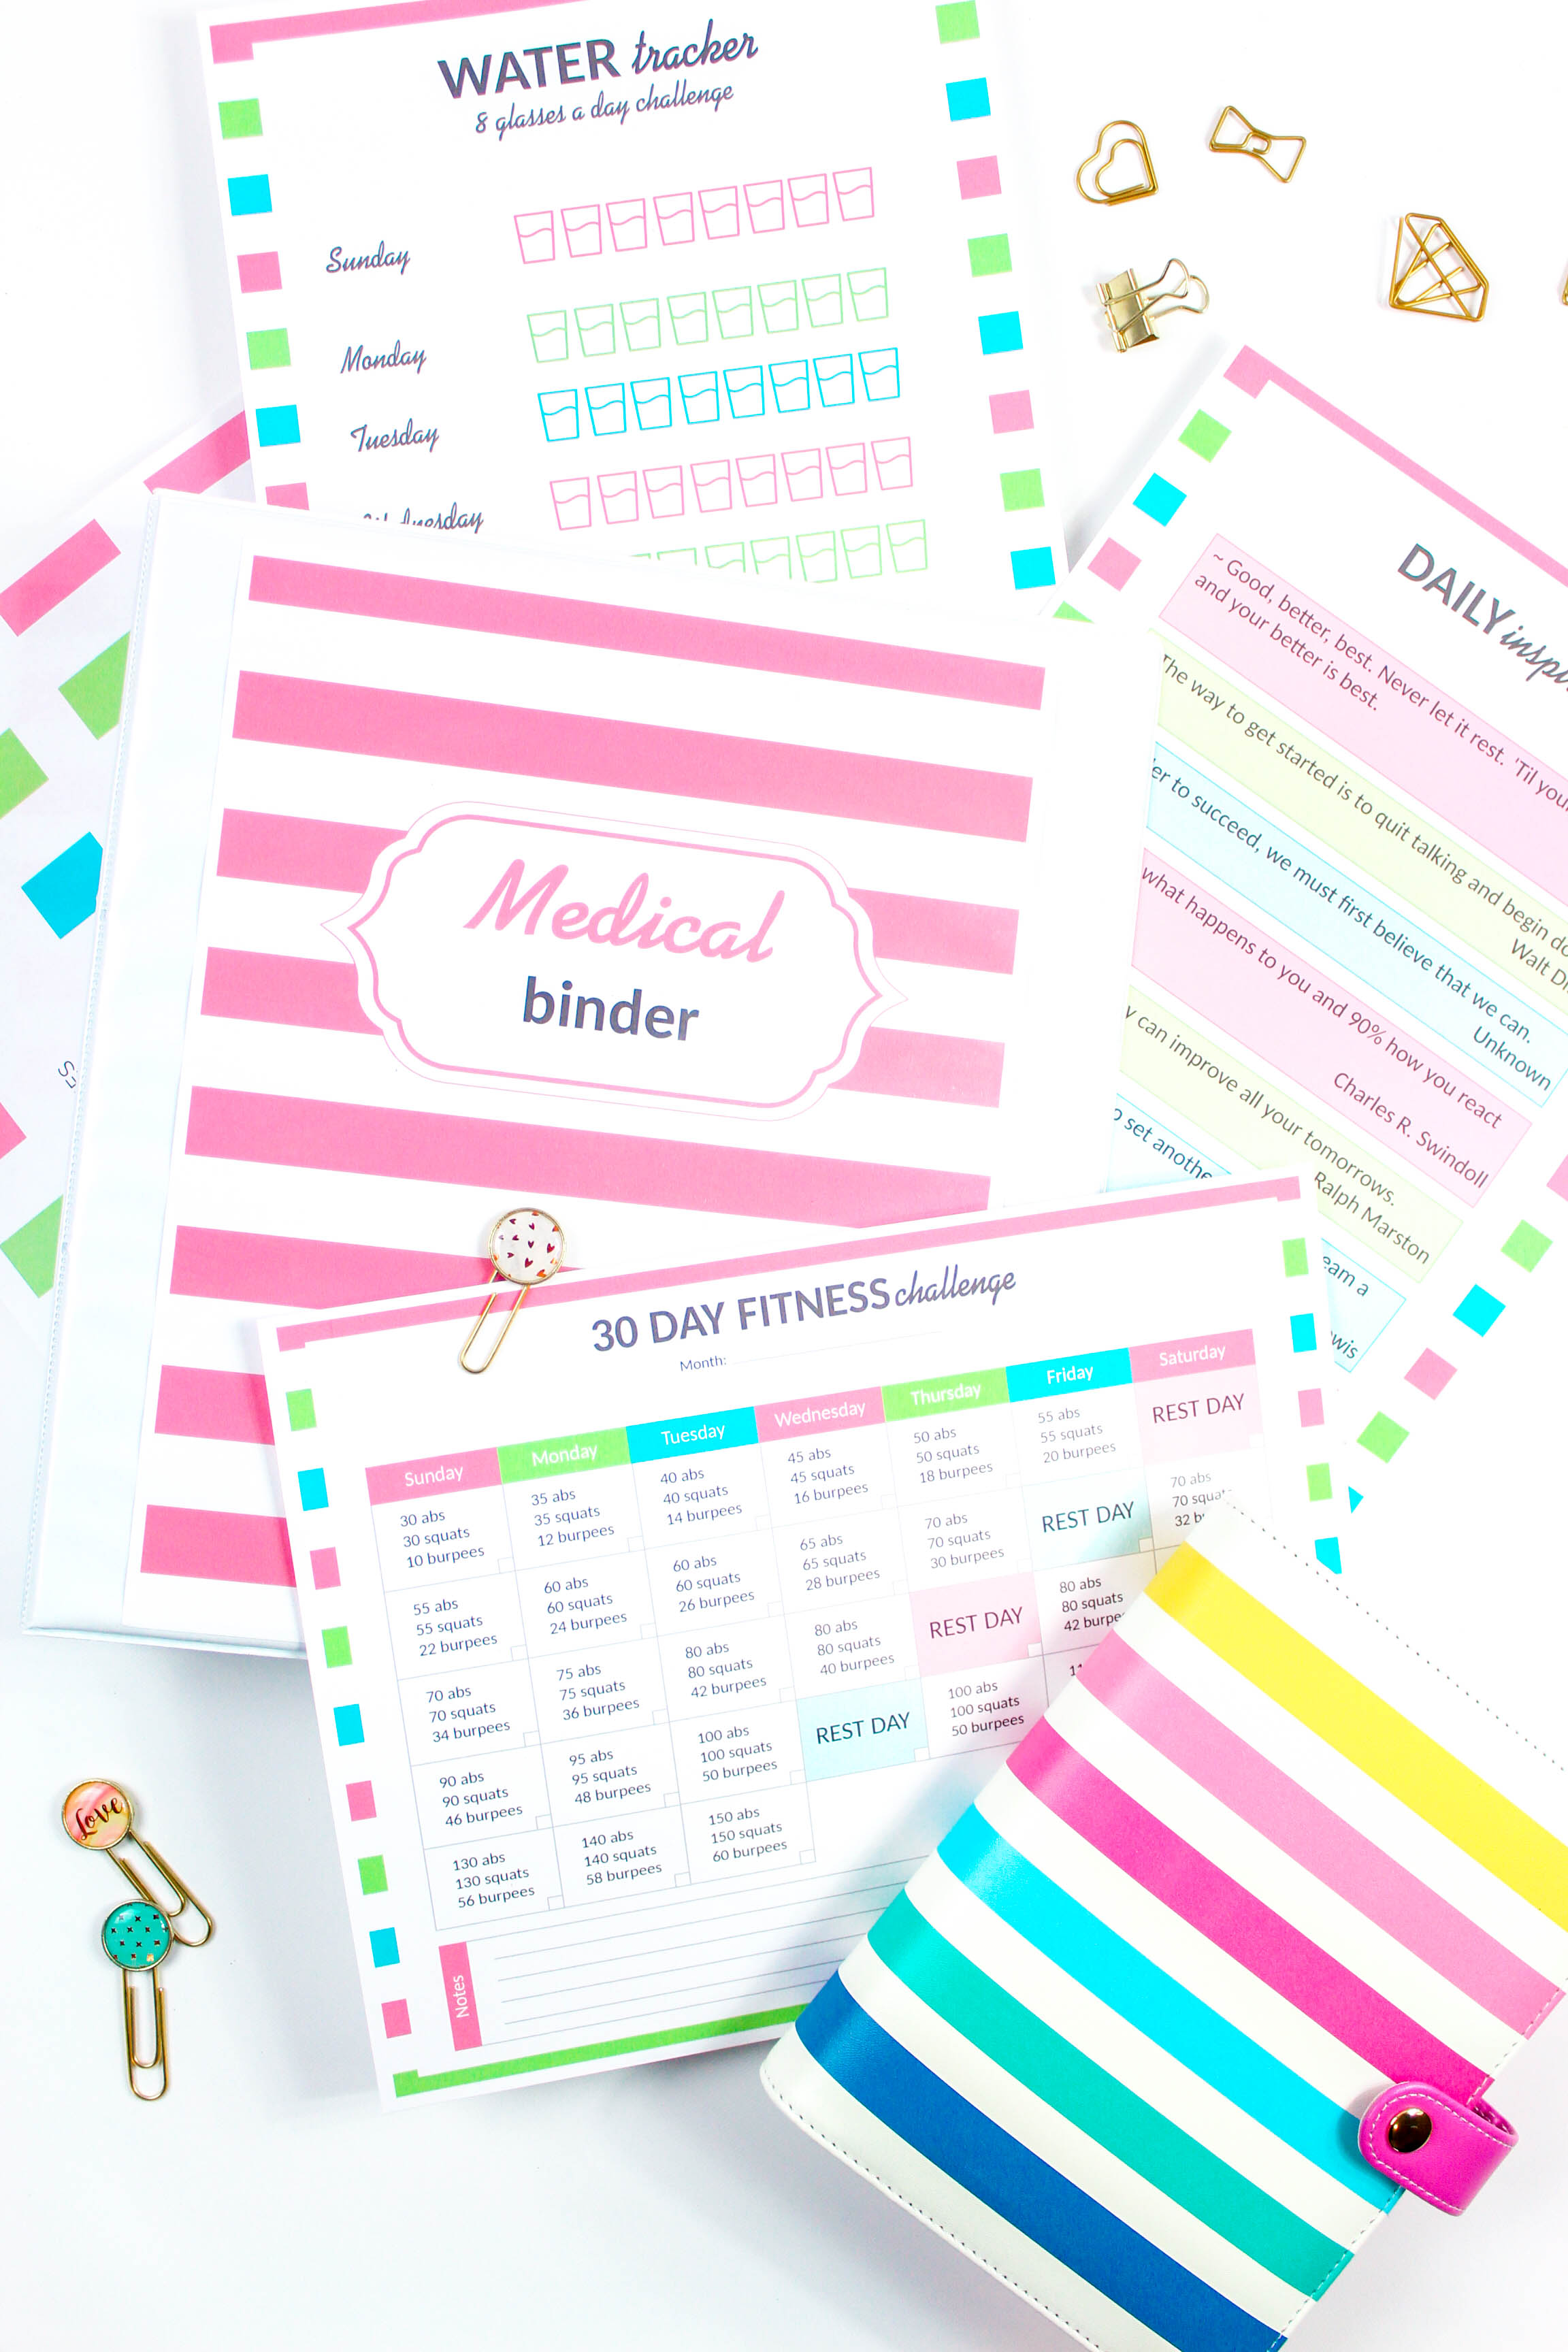 This Medical Binder has EVERYTHING you need with over 40 pages, from medical information, weight loss tracker, personal workout plan, fitness challenge, daily inspiration, family health history, and much, much more!